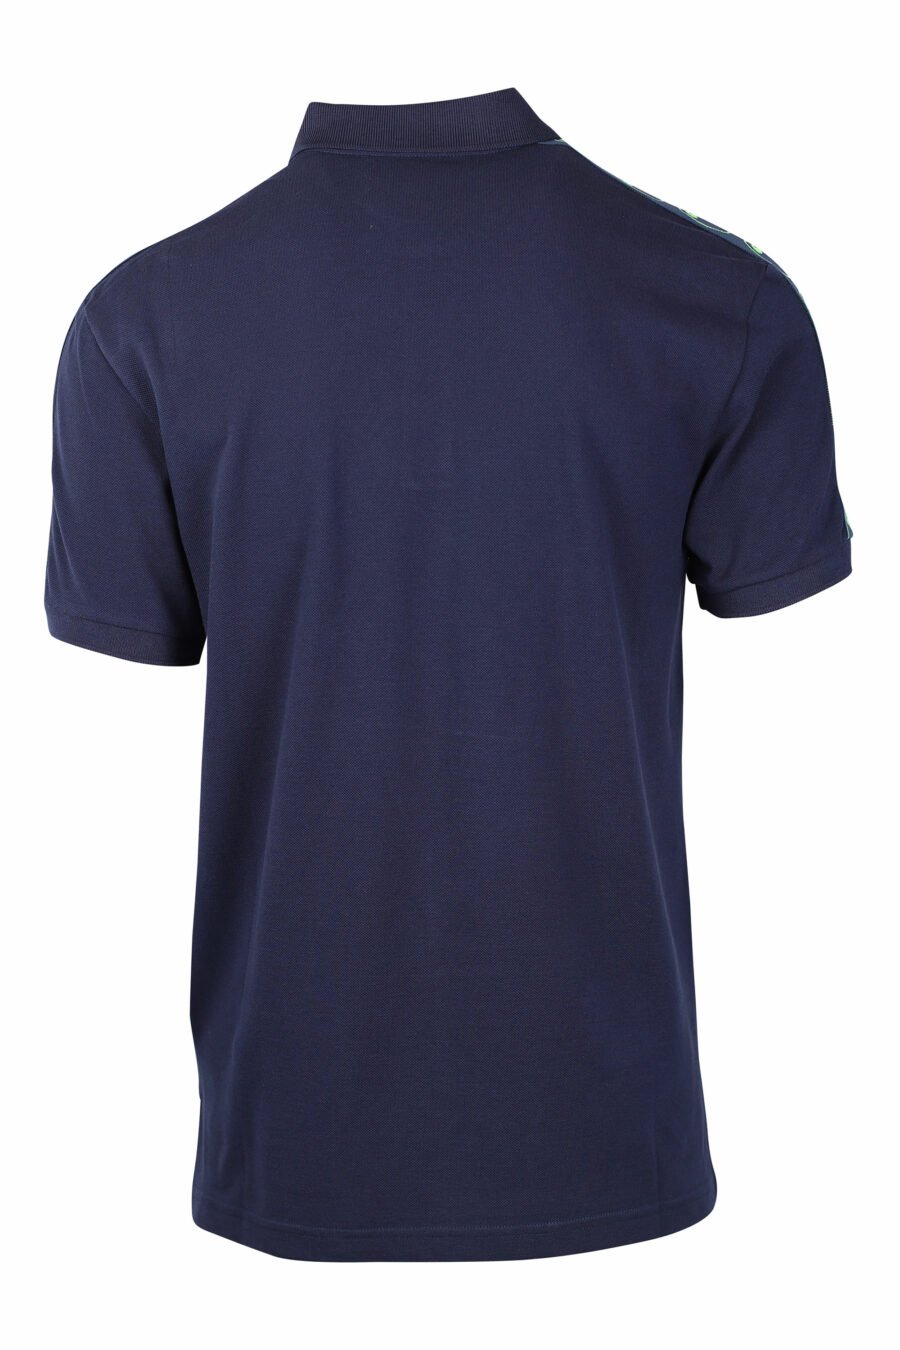 Dark blue polo shirt with double minilogue question and green shoulder logo - IMG 1452